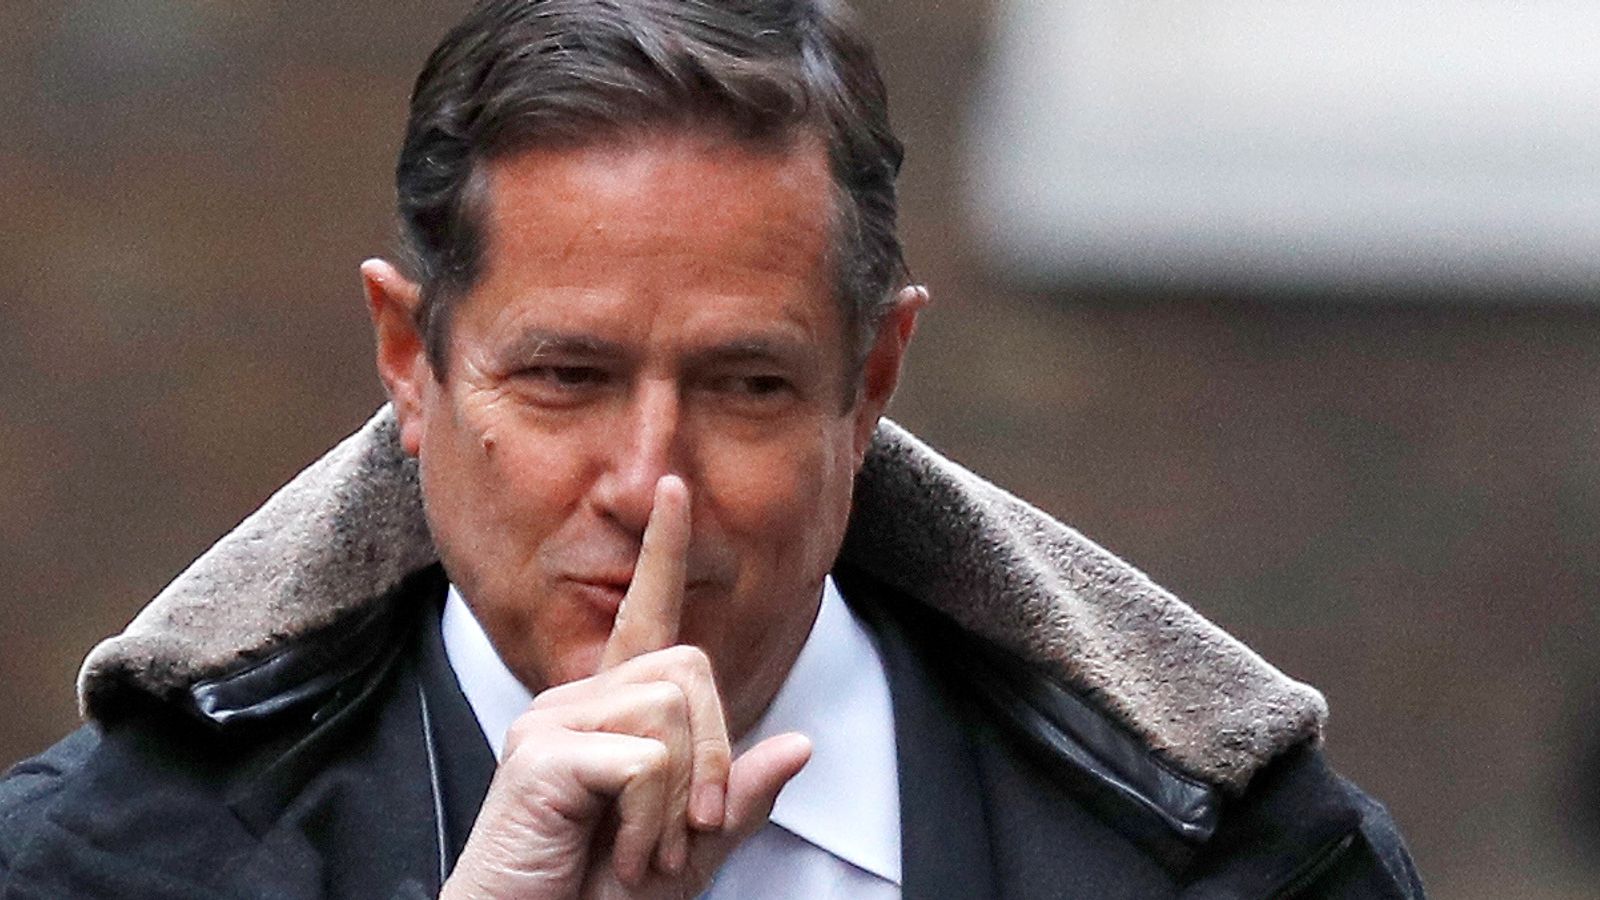 Ex-Barclays CEO fined £1.8m after misleading statements over his links to Jeffrey Epstein